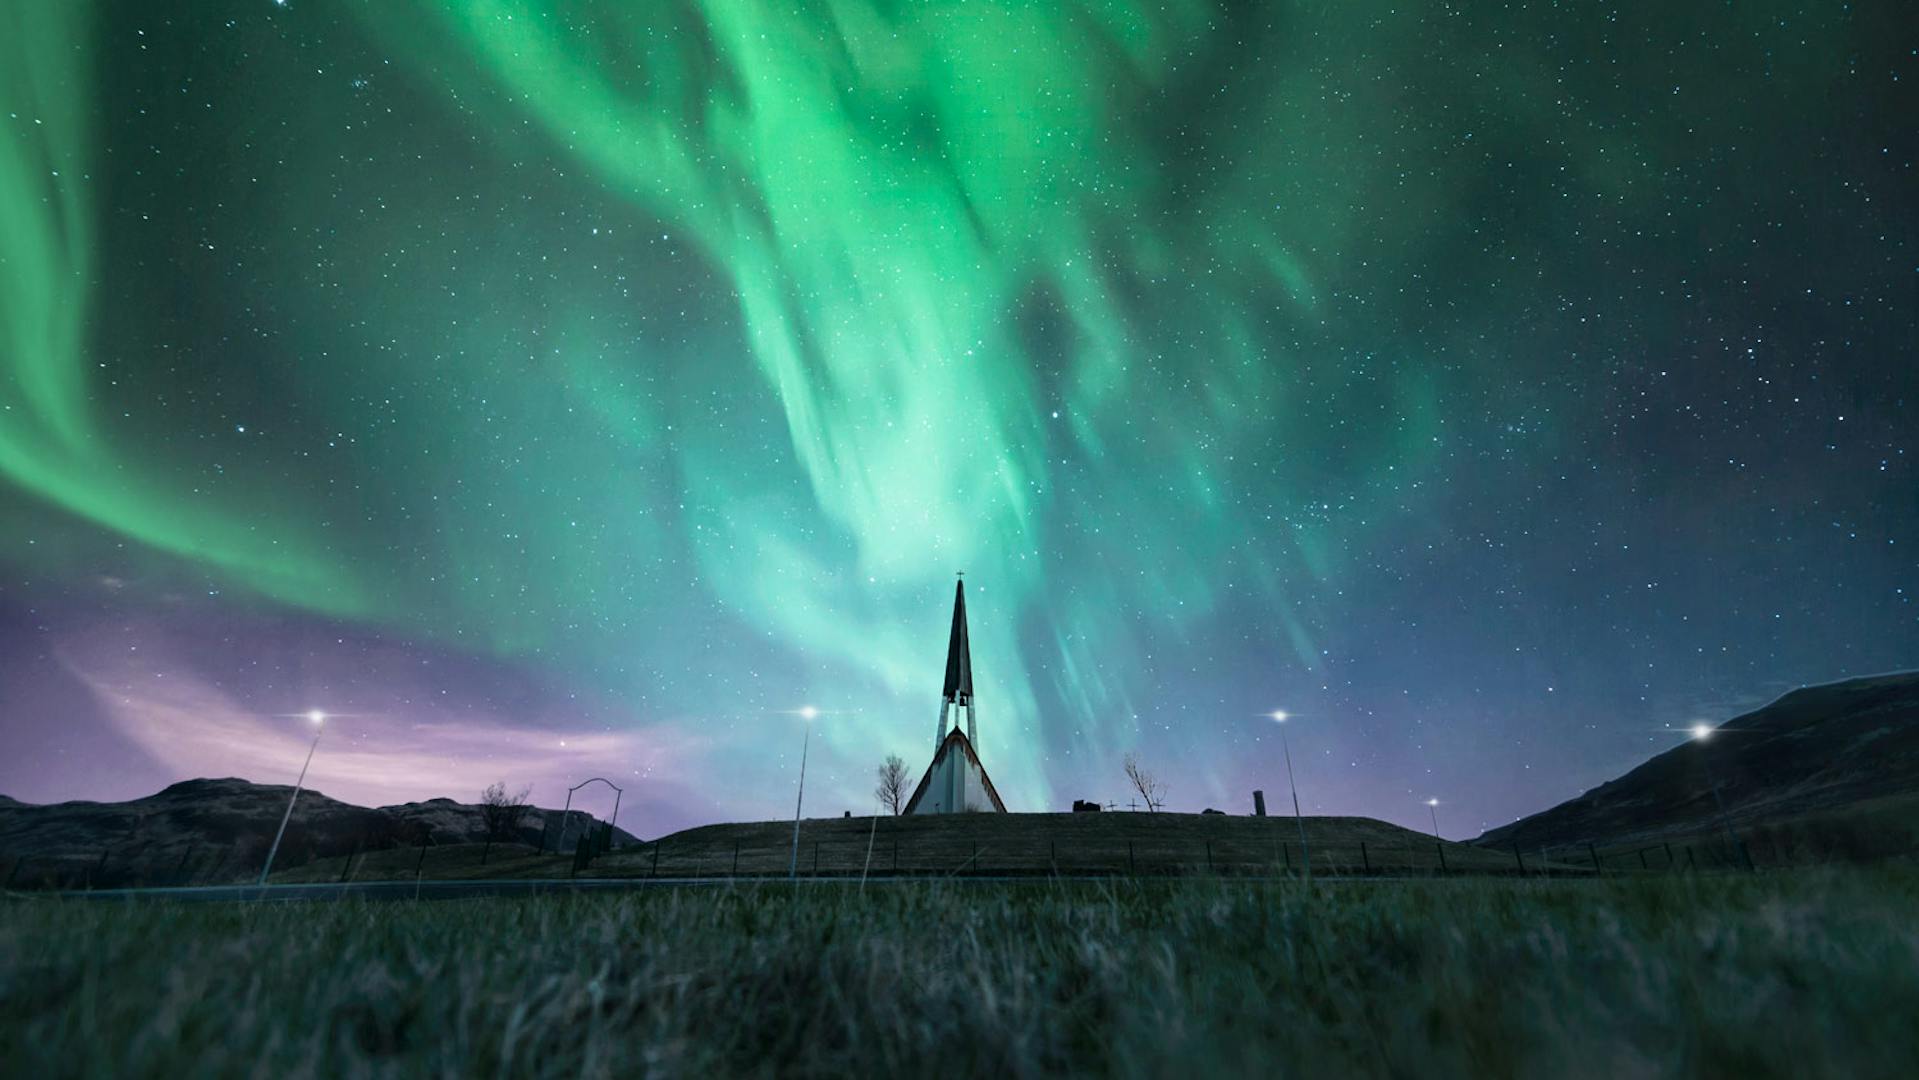 Spiky church photographed under northern lights.